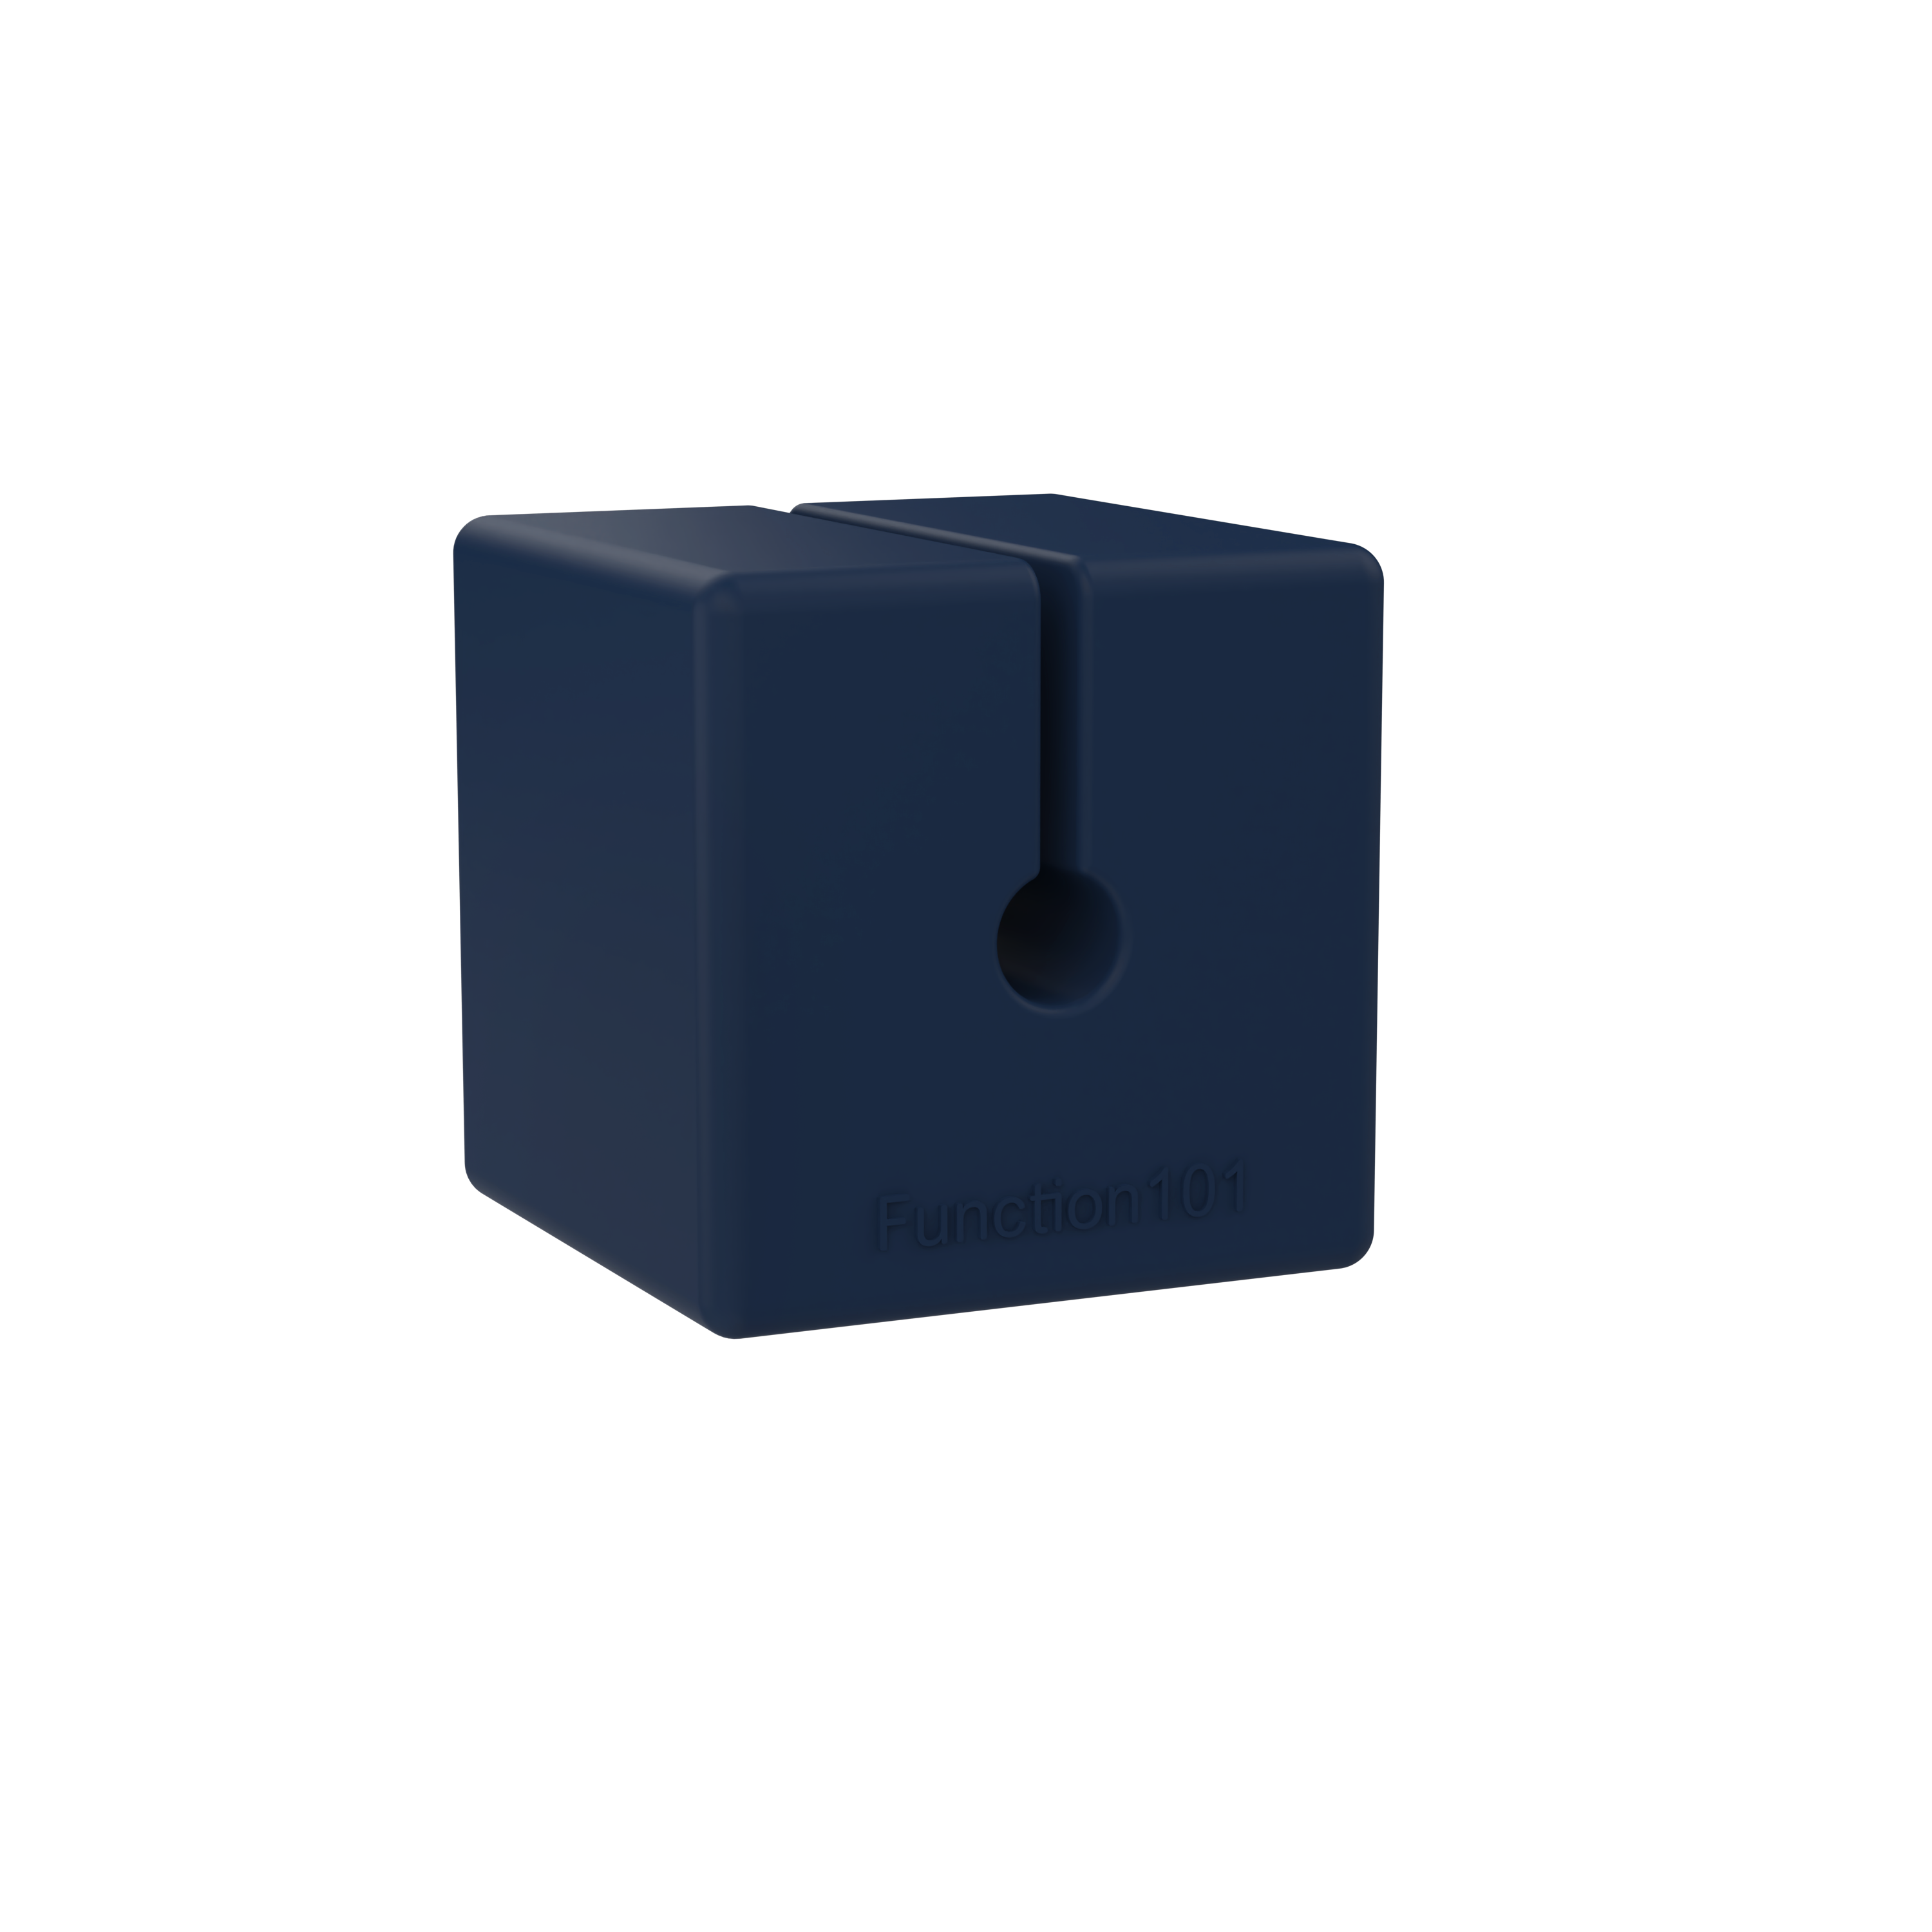 CABLE BLOCK XL - Navy